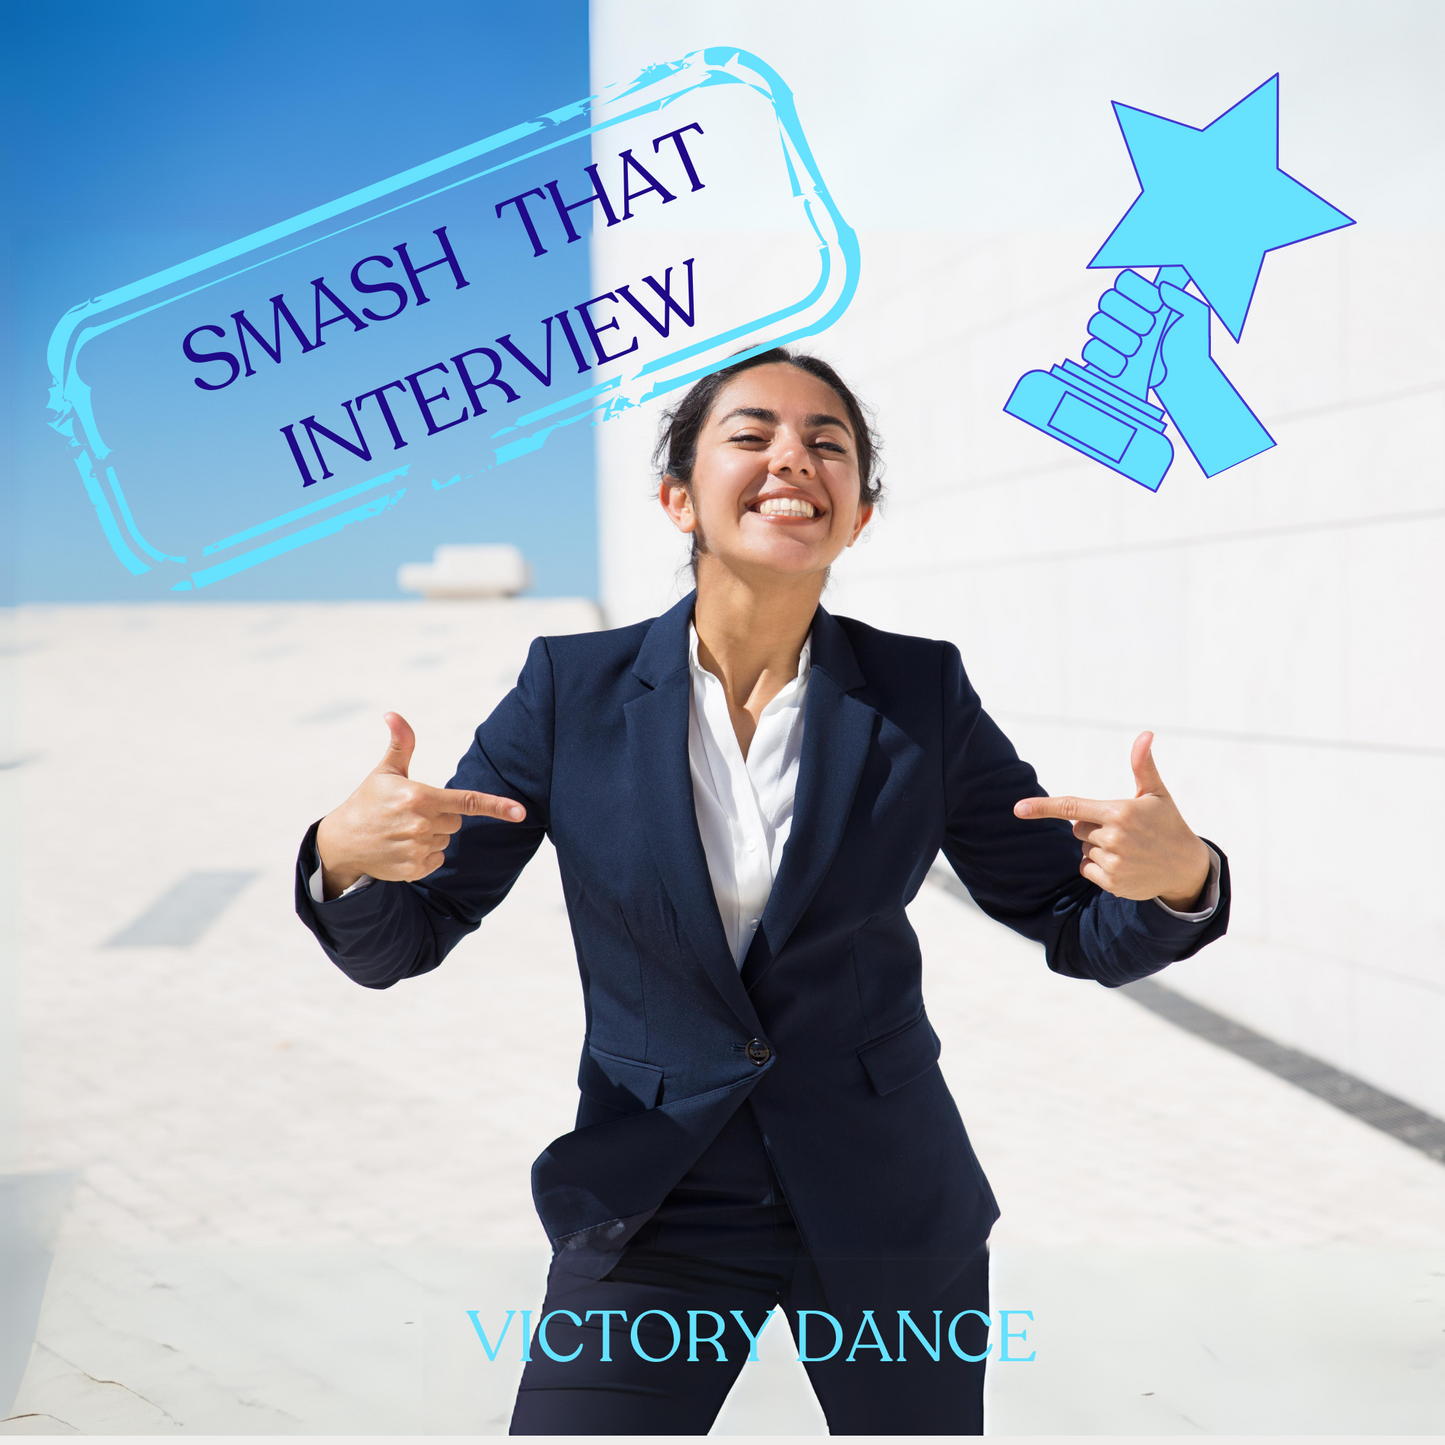 Smash that interview, smiling, confident minority woman image who just passed an interview. Motivational poster for VCareer.org interview guide. 